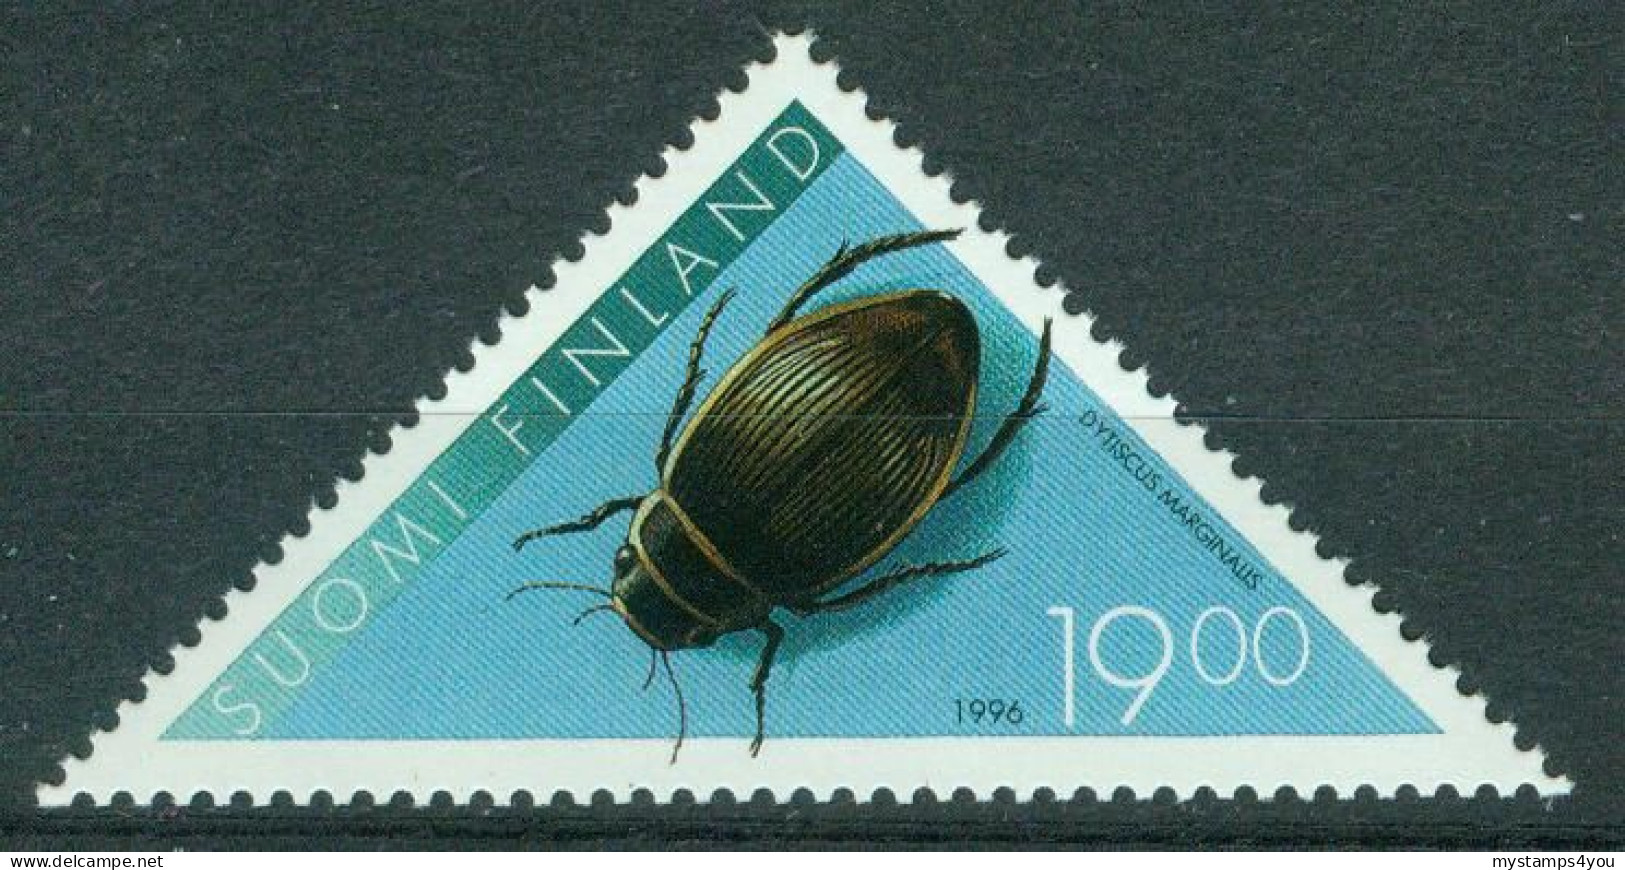 Bm Finland 1996 MiNr 1351 MNH | Great Diving Beetle #5-0216 - Nuovi